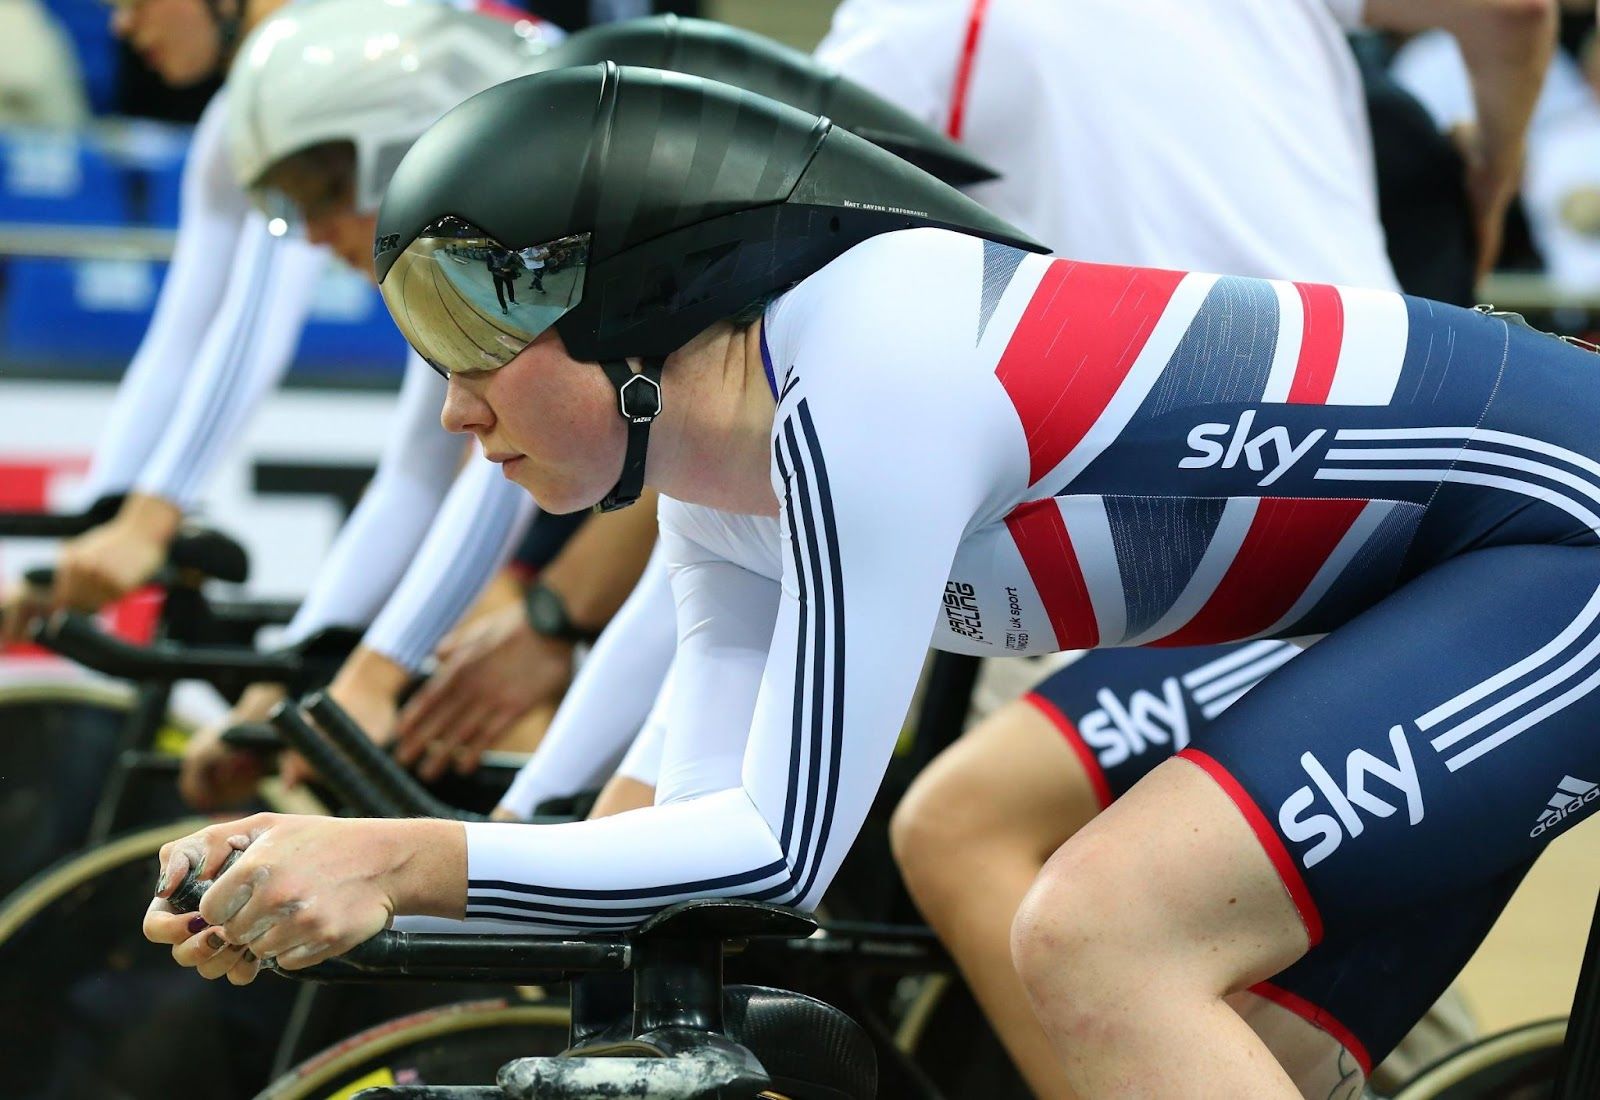 Katie Archibald bags gold in World Track Cycling Championship